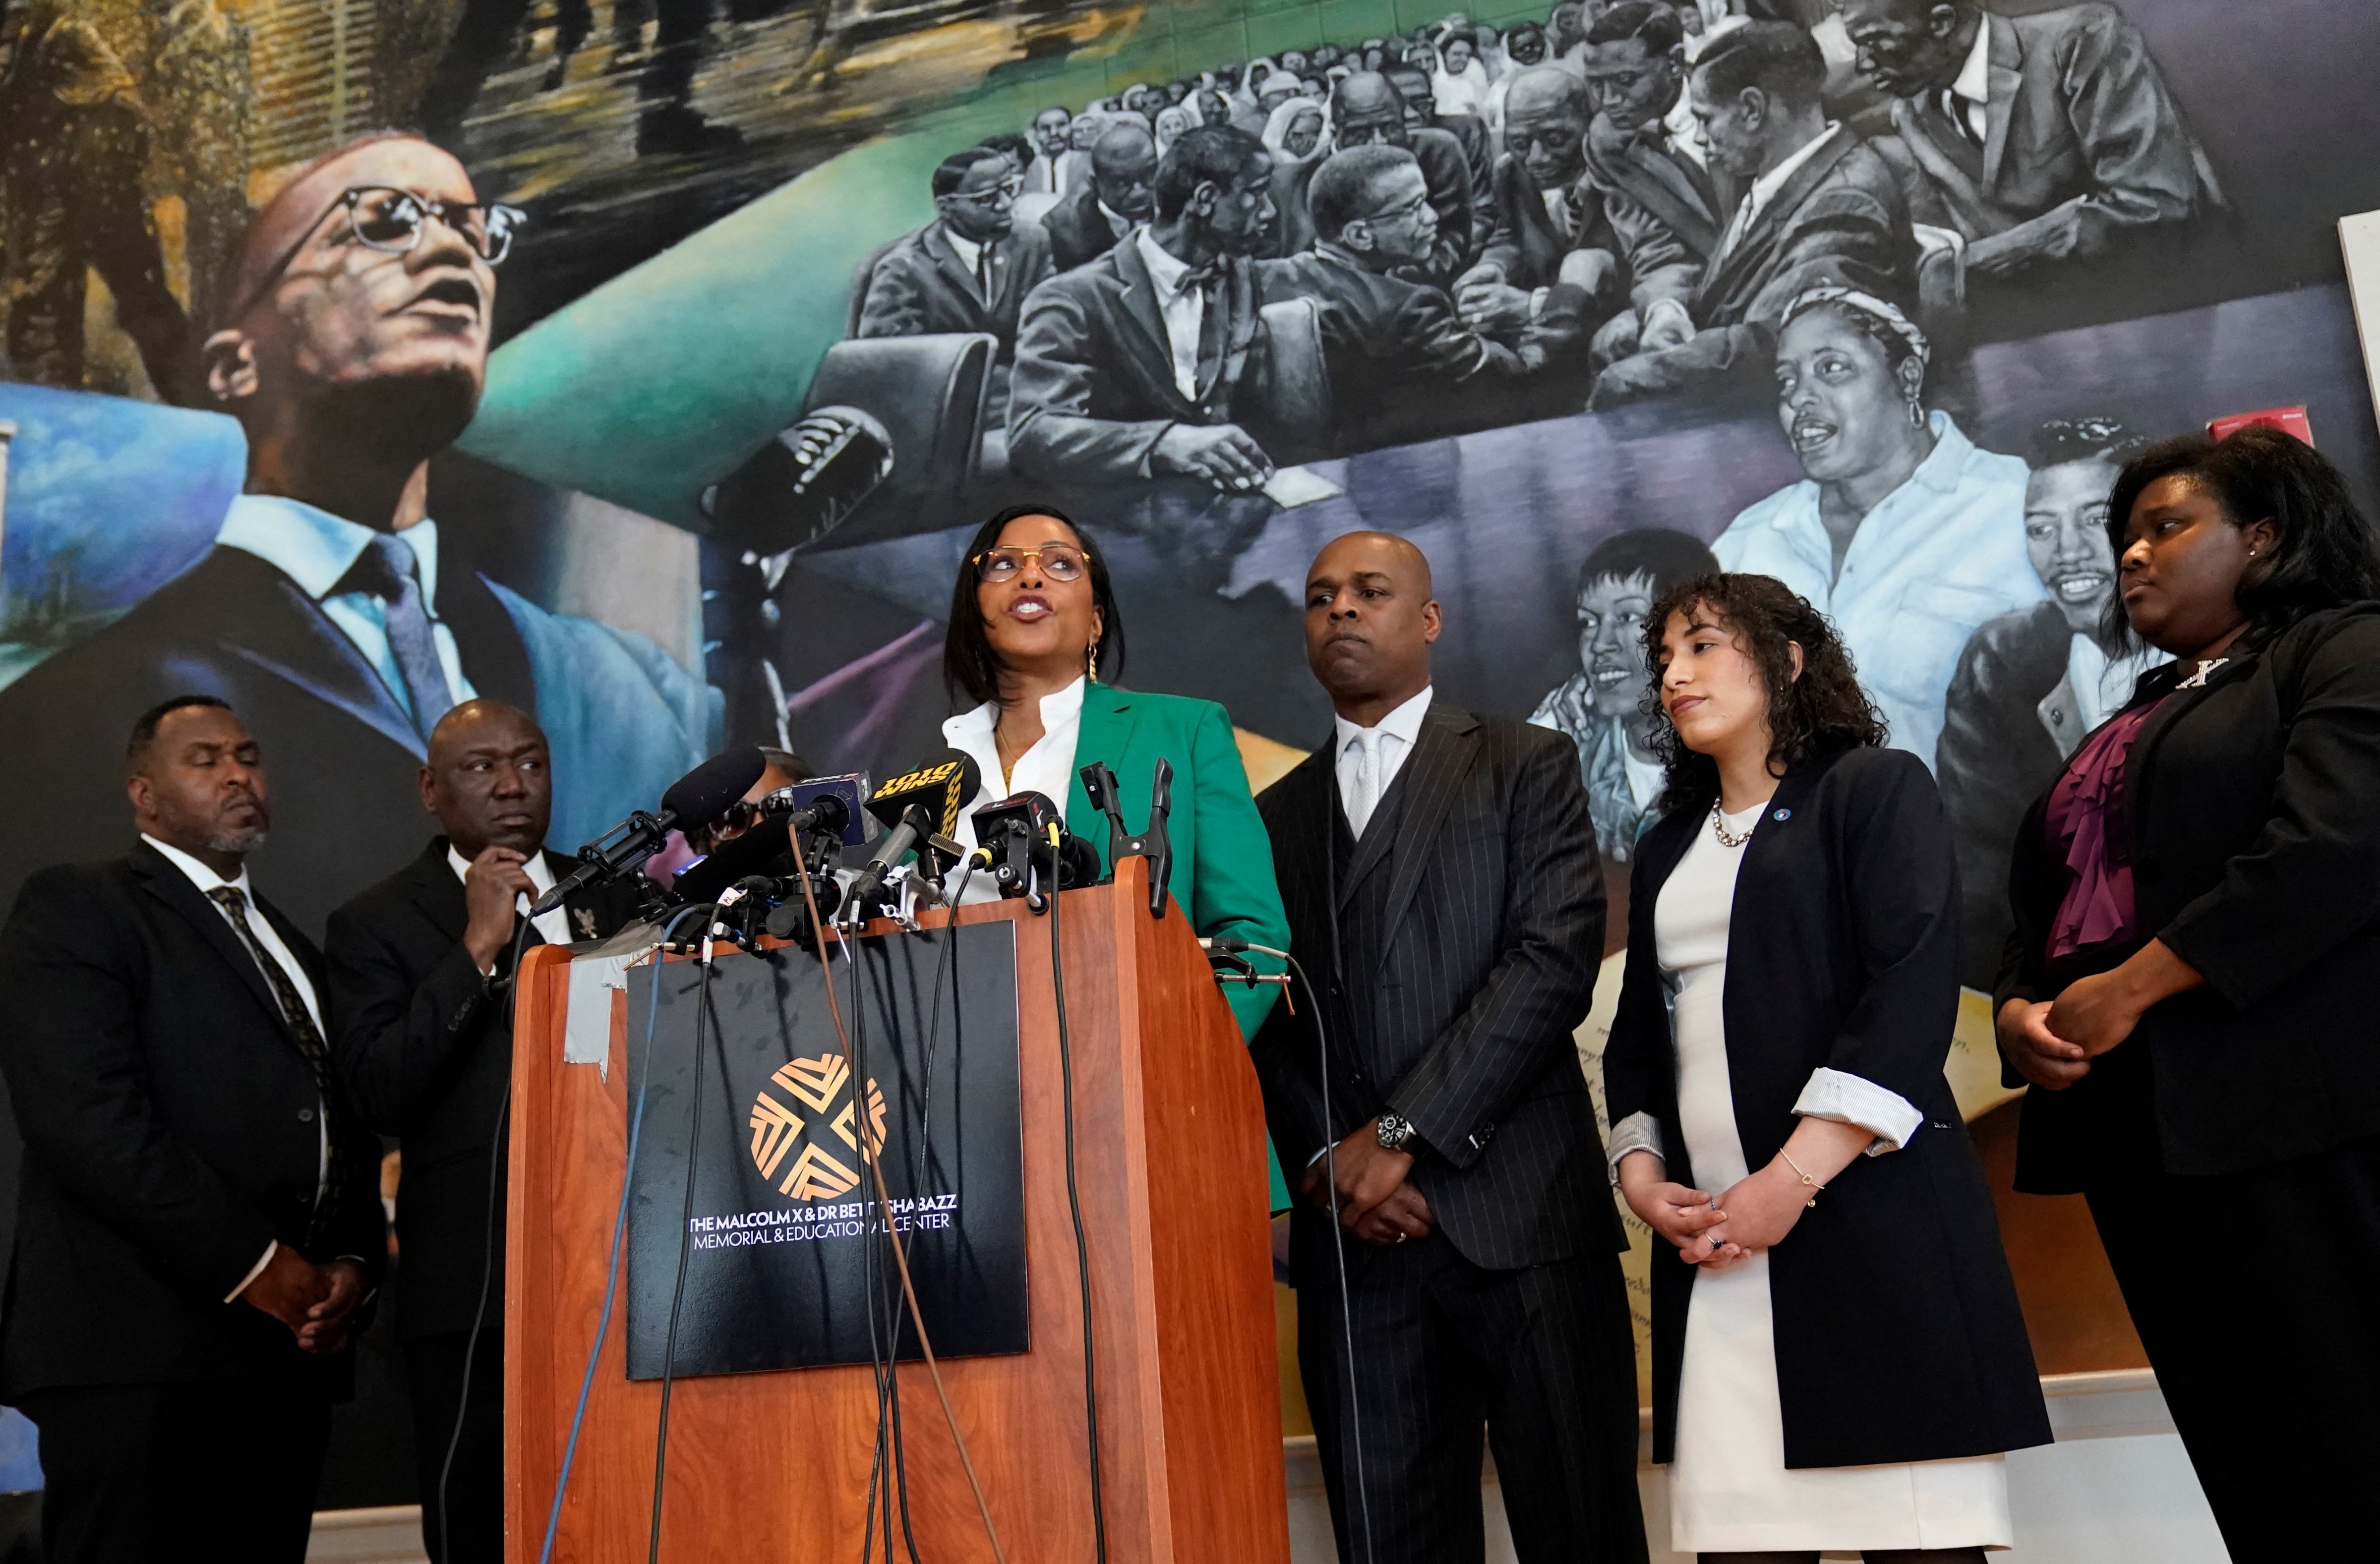 Ilyasah Shabazz (C), daughter of African-American activist Malcolm X, speaks alongside civil rights attorney Ben Crump (L) and co-counsel Ray Hamlin (C, R) during a press conference in New York on February 21, 2023 at the Malcolm X &amp; Dr. Betty Shabazz Memorial and Educational Center, formerly known as the Audubon Ballroom, where Malcolm X was shot dead at 39 on Feb. 21, 1965. (Timothy A. Clary–AFP via Getty Images)